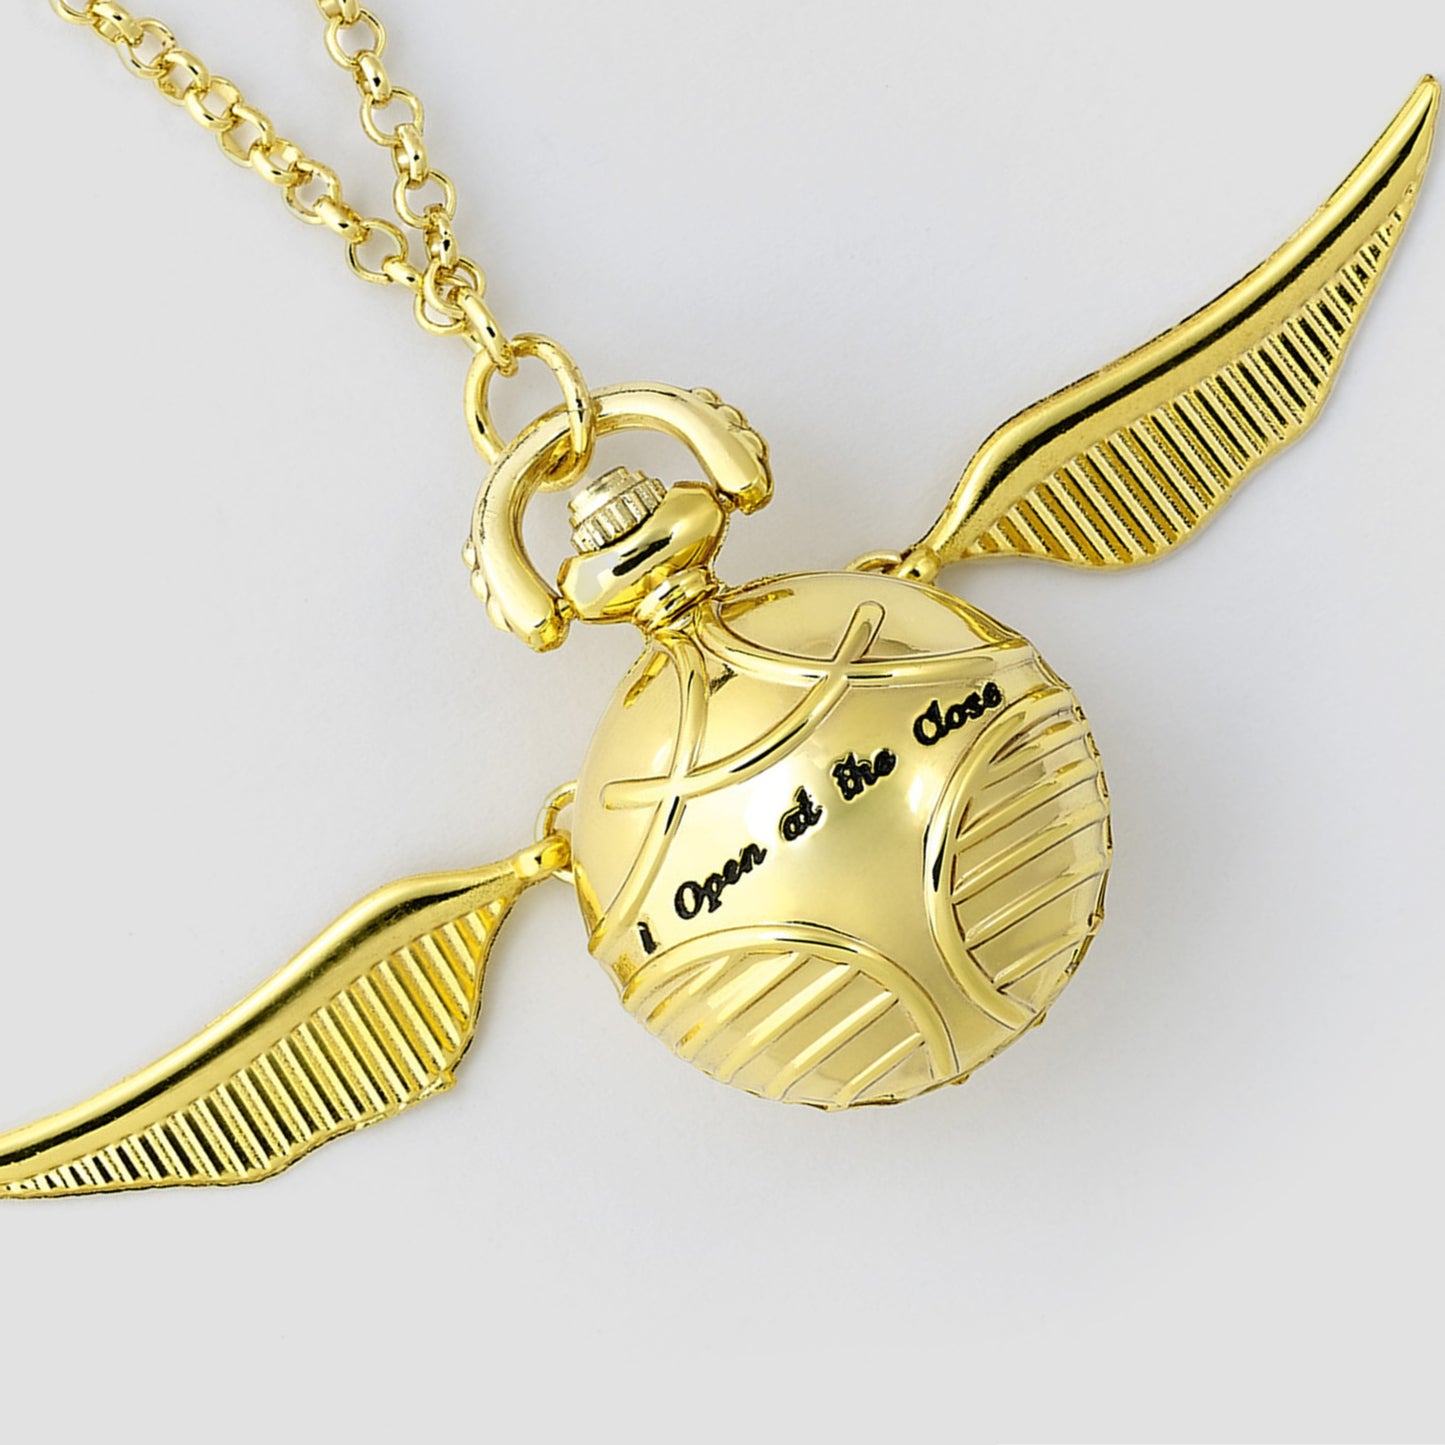 Golden Snitch Watch Necklace